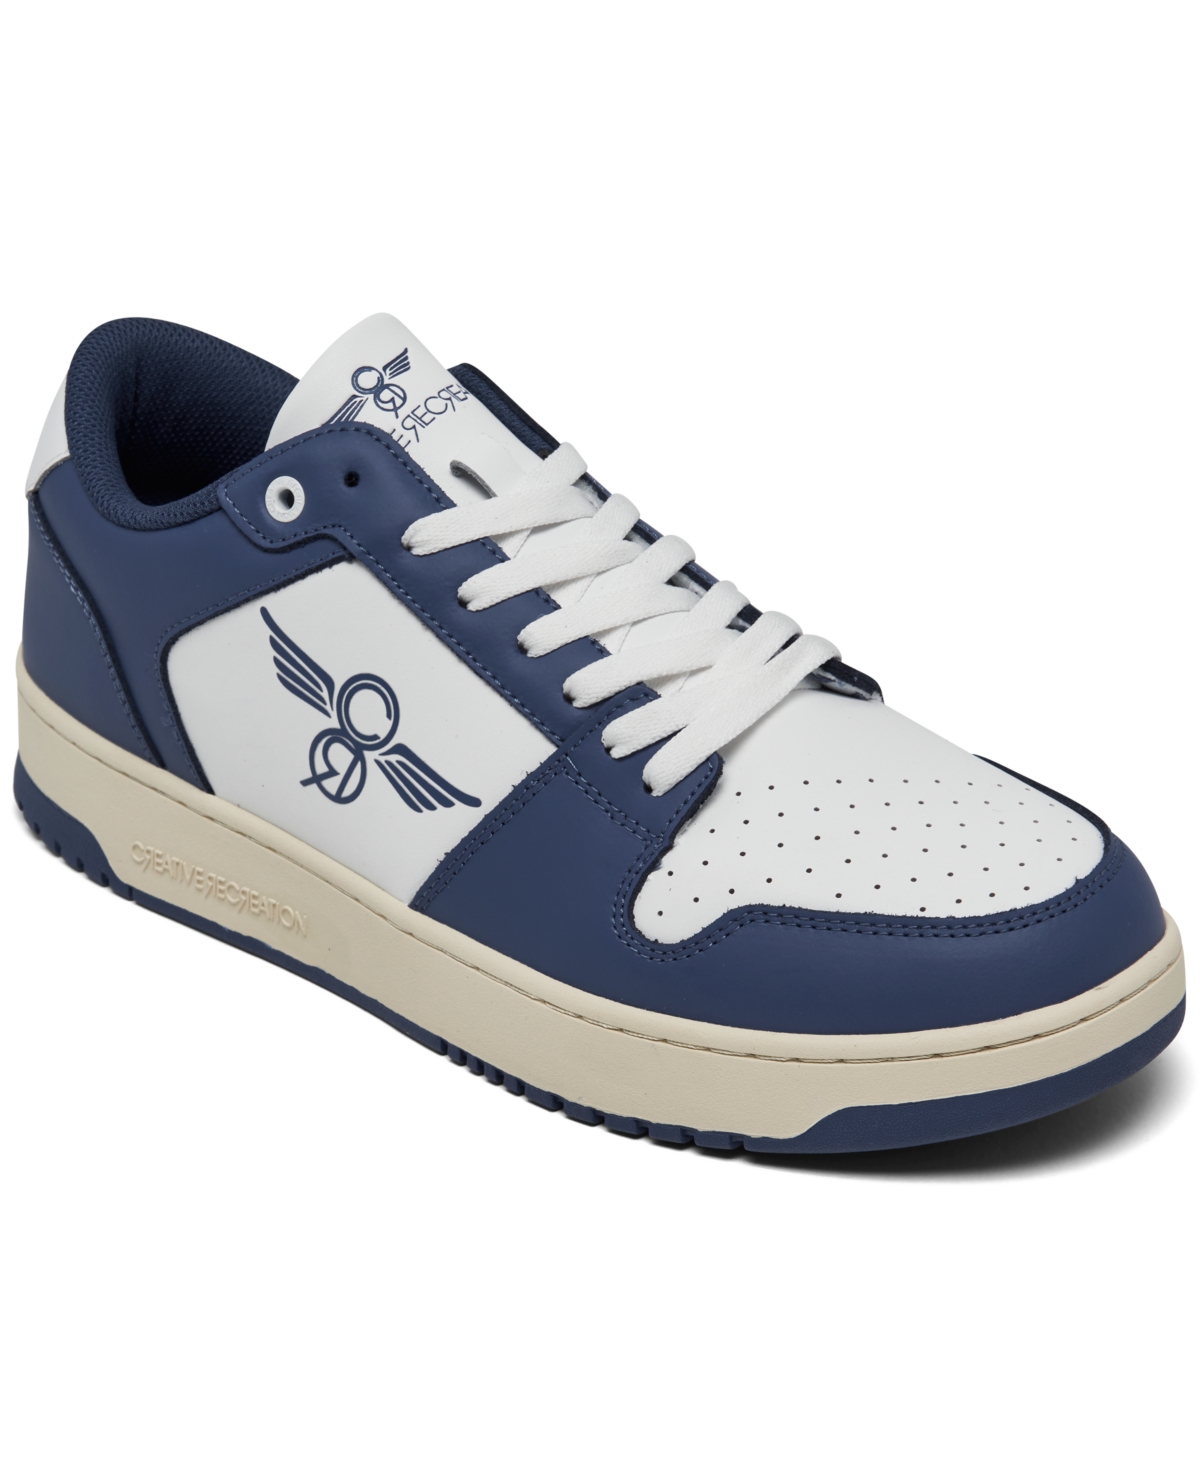 Men's Dion Low Casual Sneakers from Finish Line - Navy, White